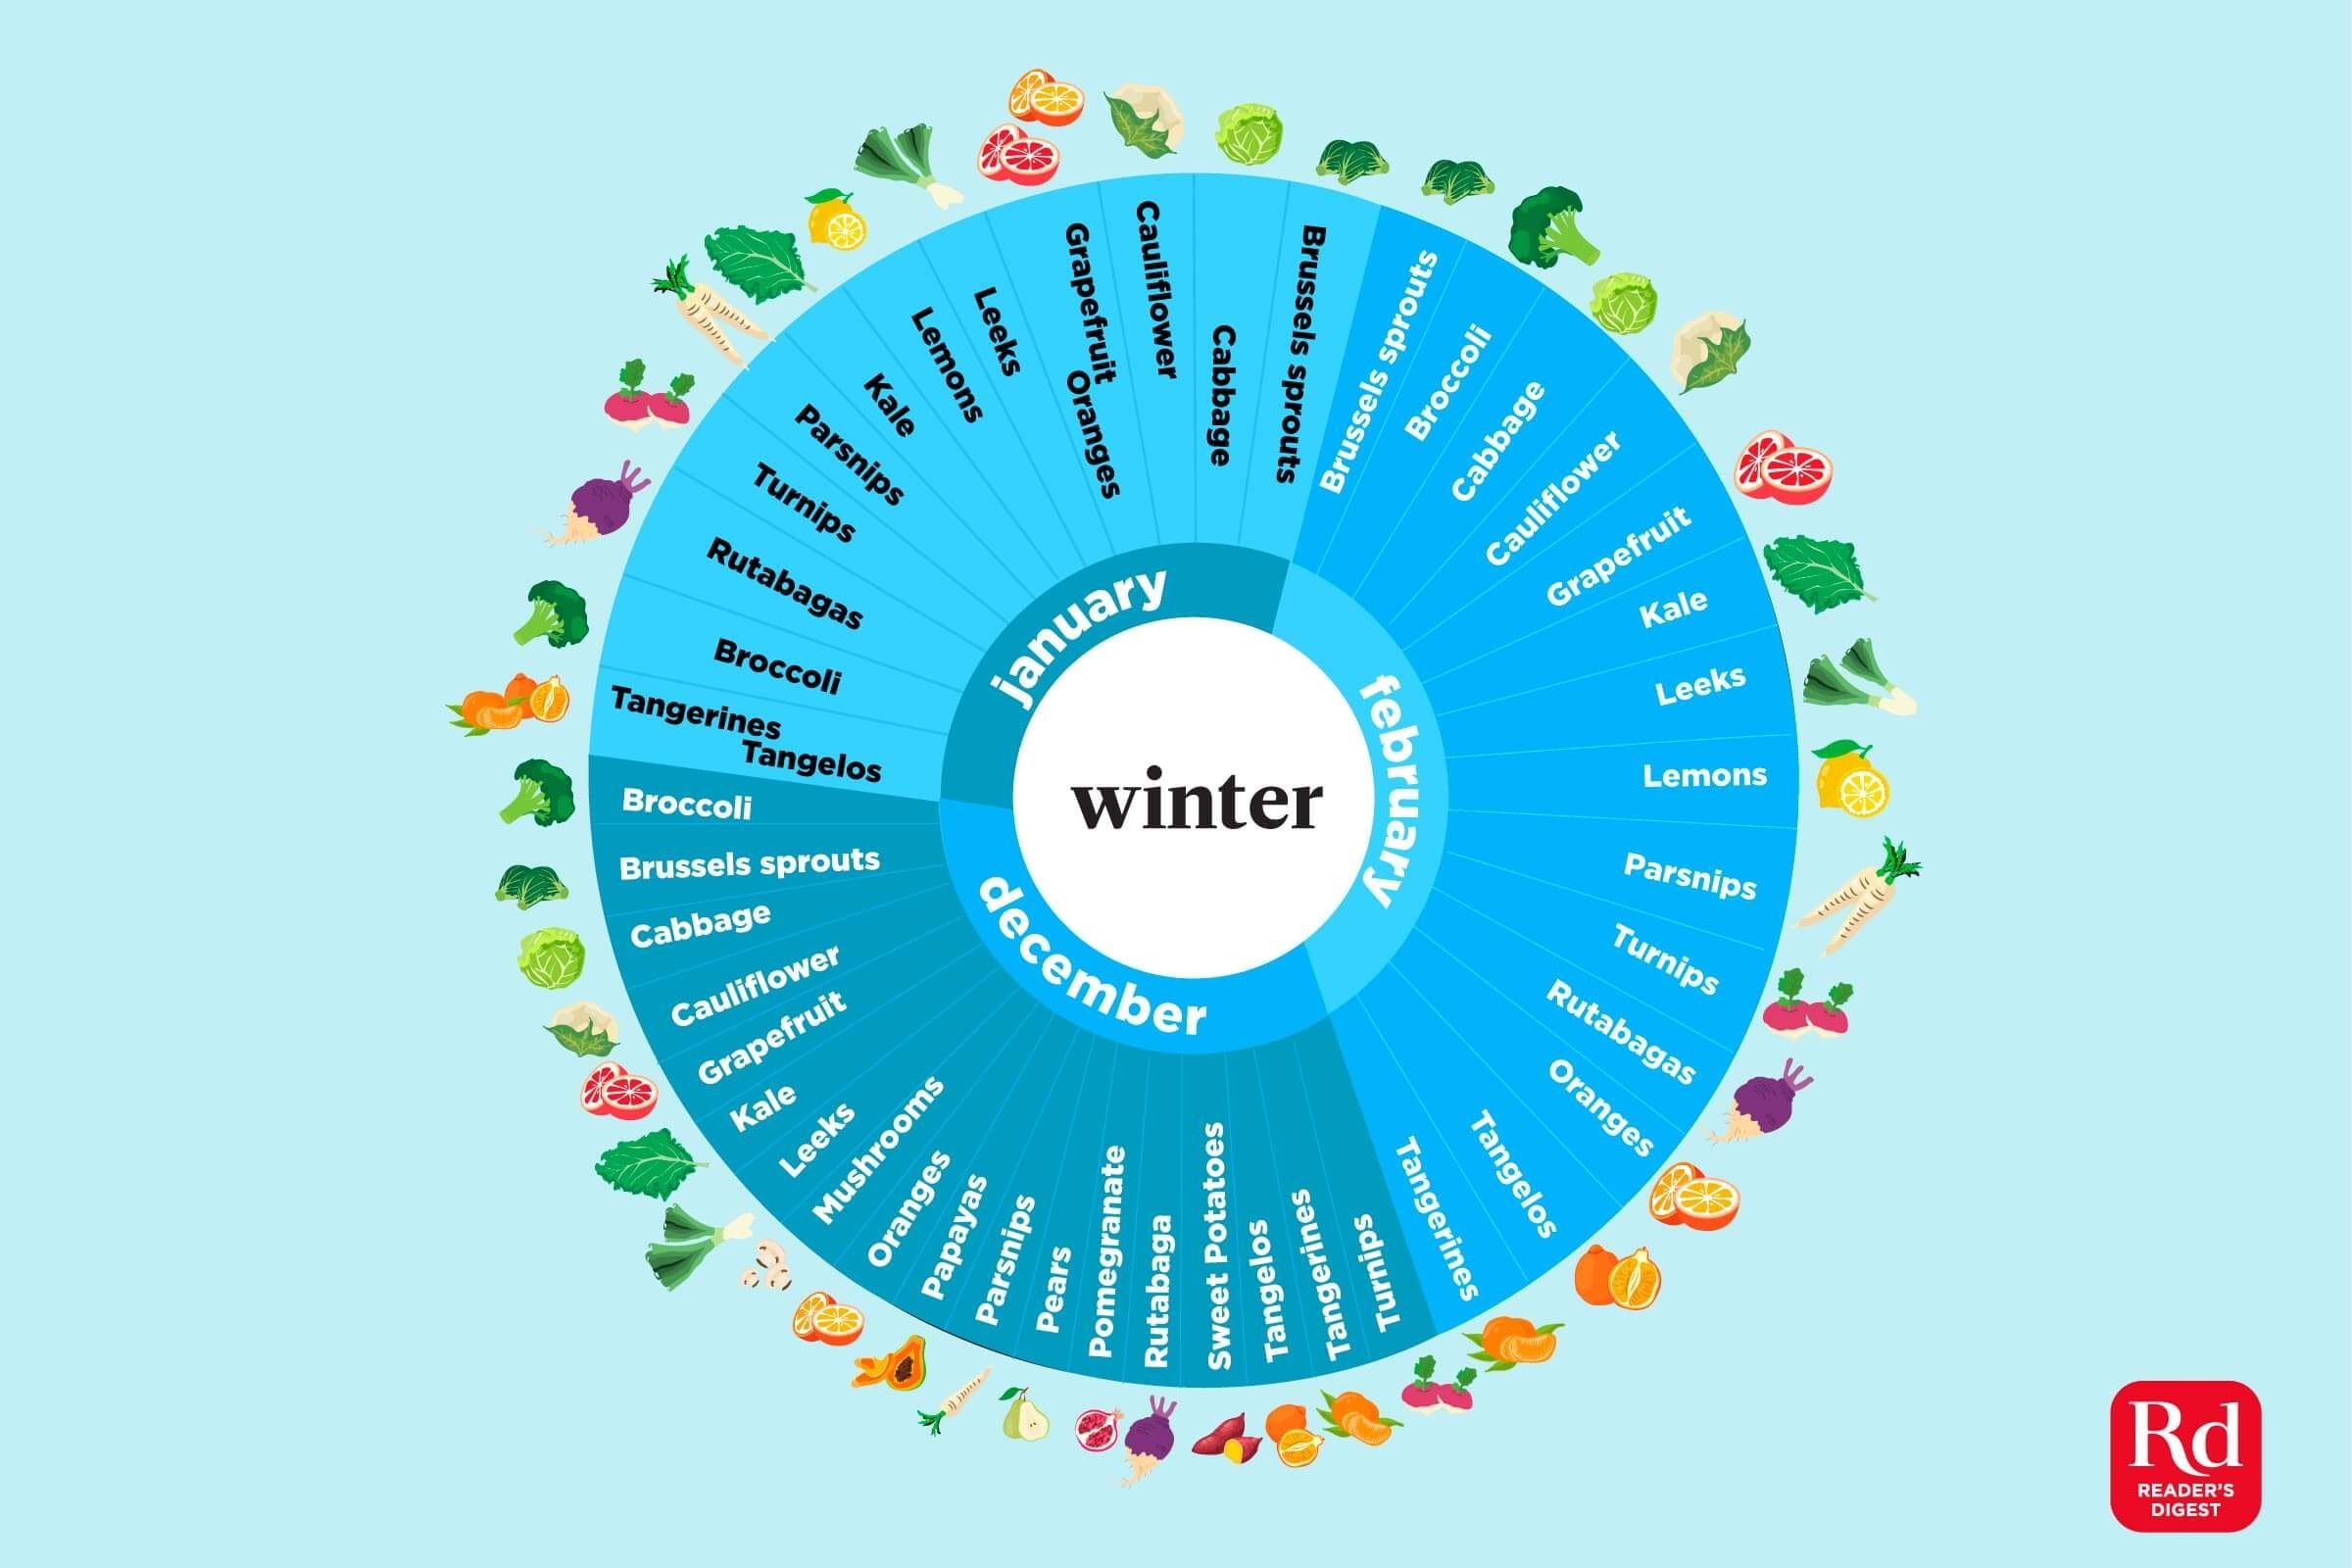 These Infographics Show the Fruits and Vegetables in Season Every Month of the Year